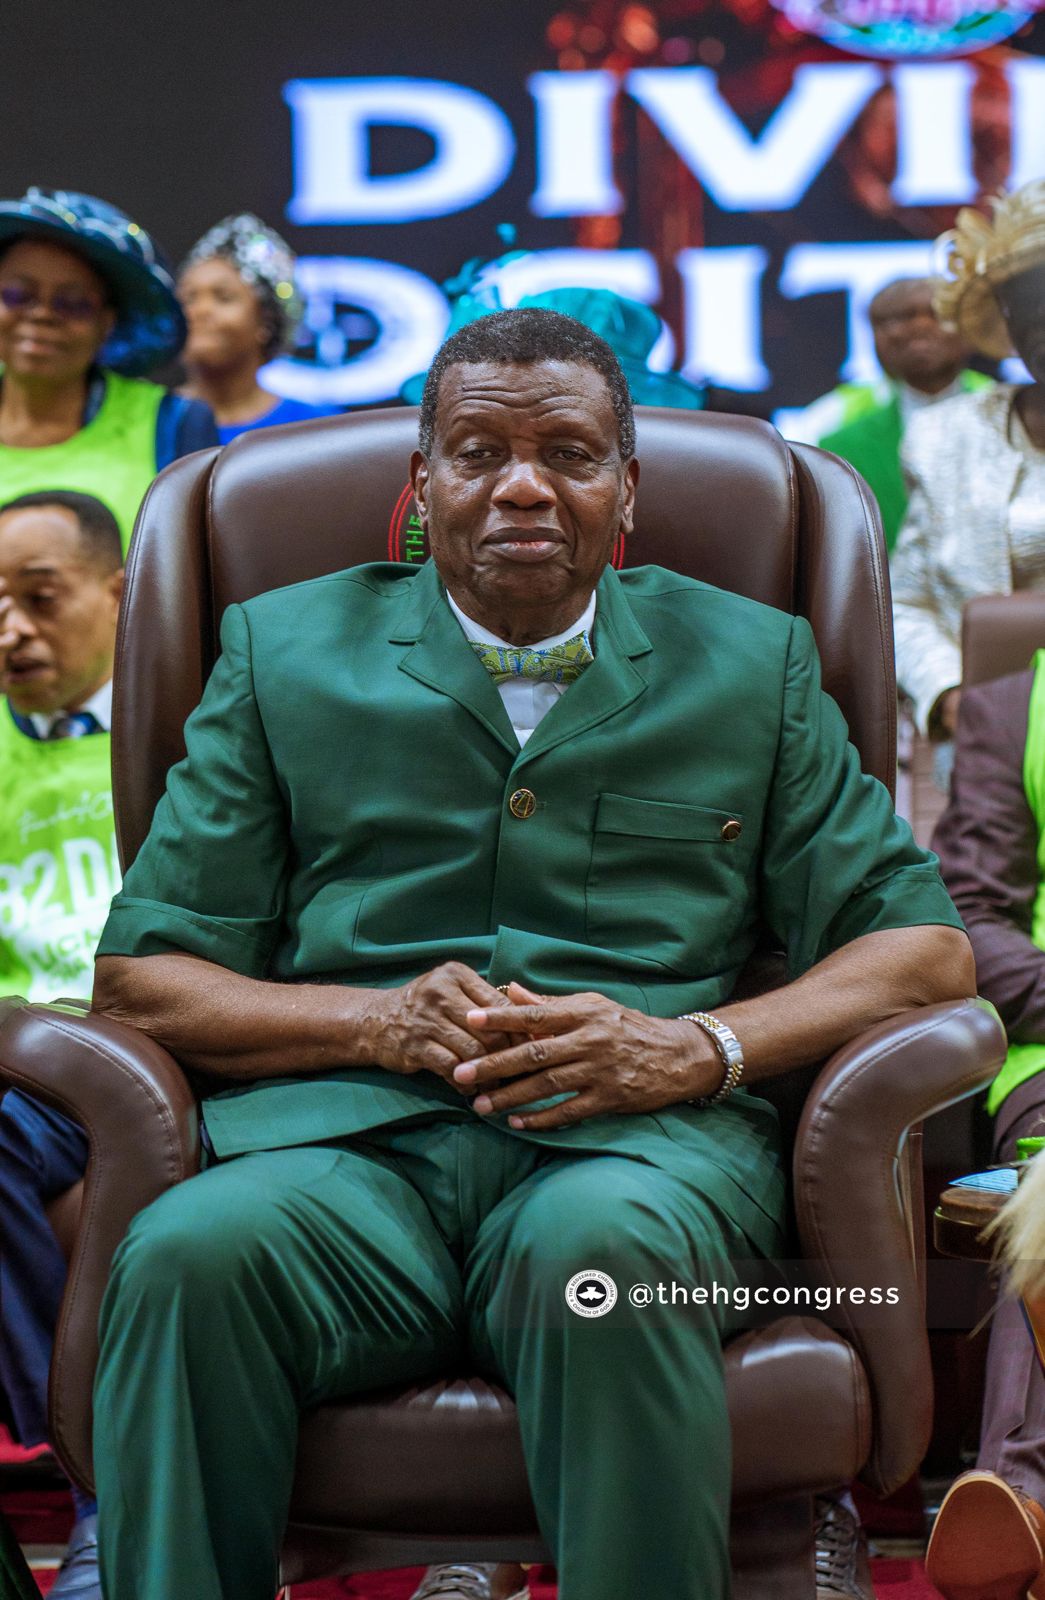 Hardship: Leaders Are Trying Their Best, Nigeria’s Problems Spiritual – Adeboye